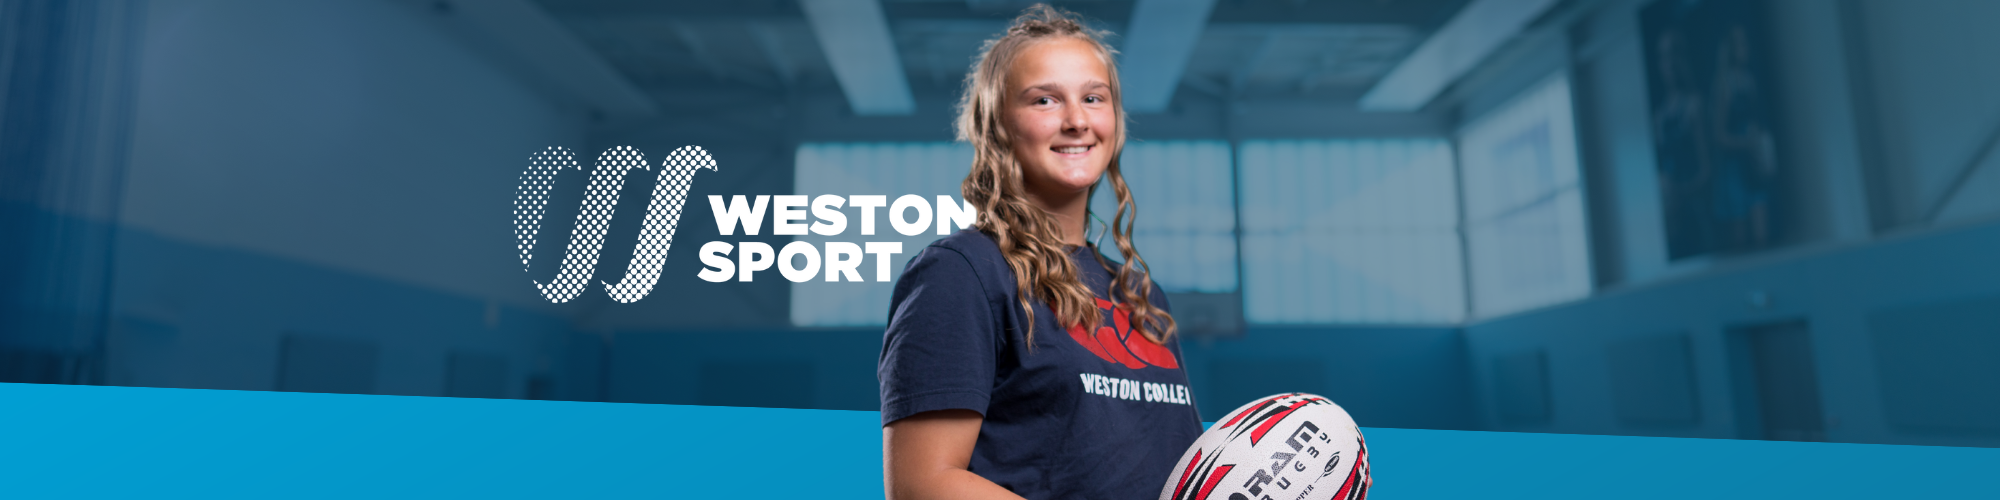 Weston Sport Academy logo next to female rugby player student